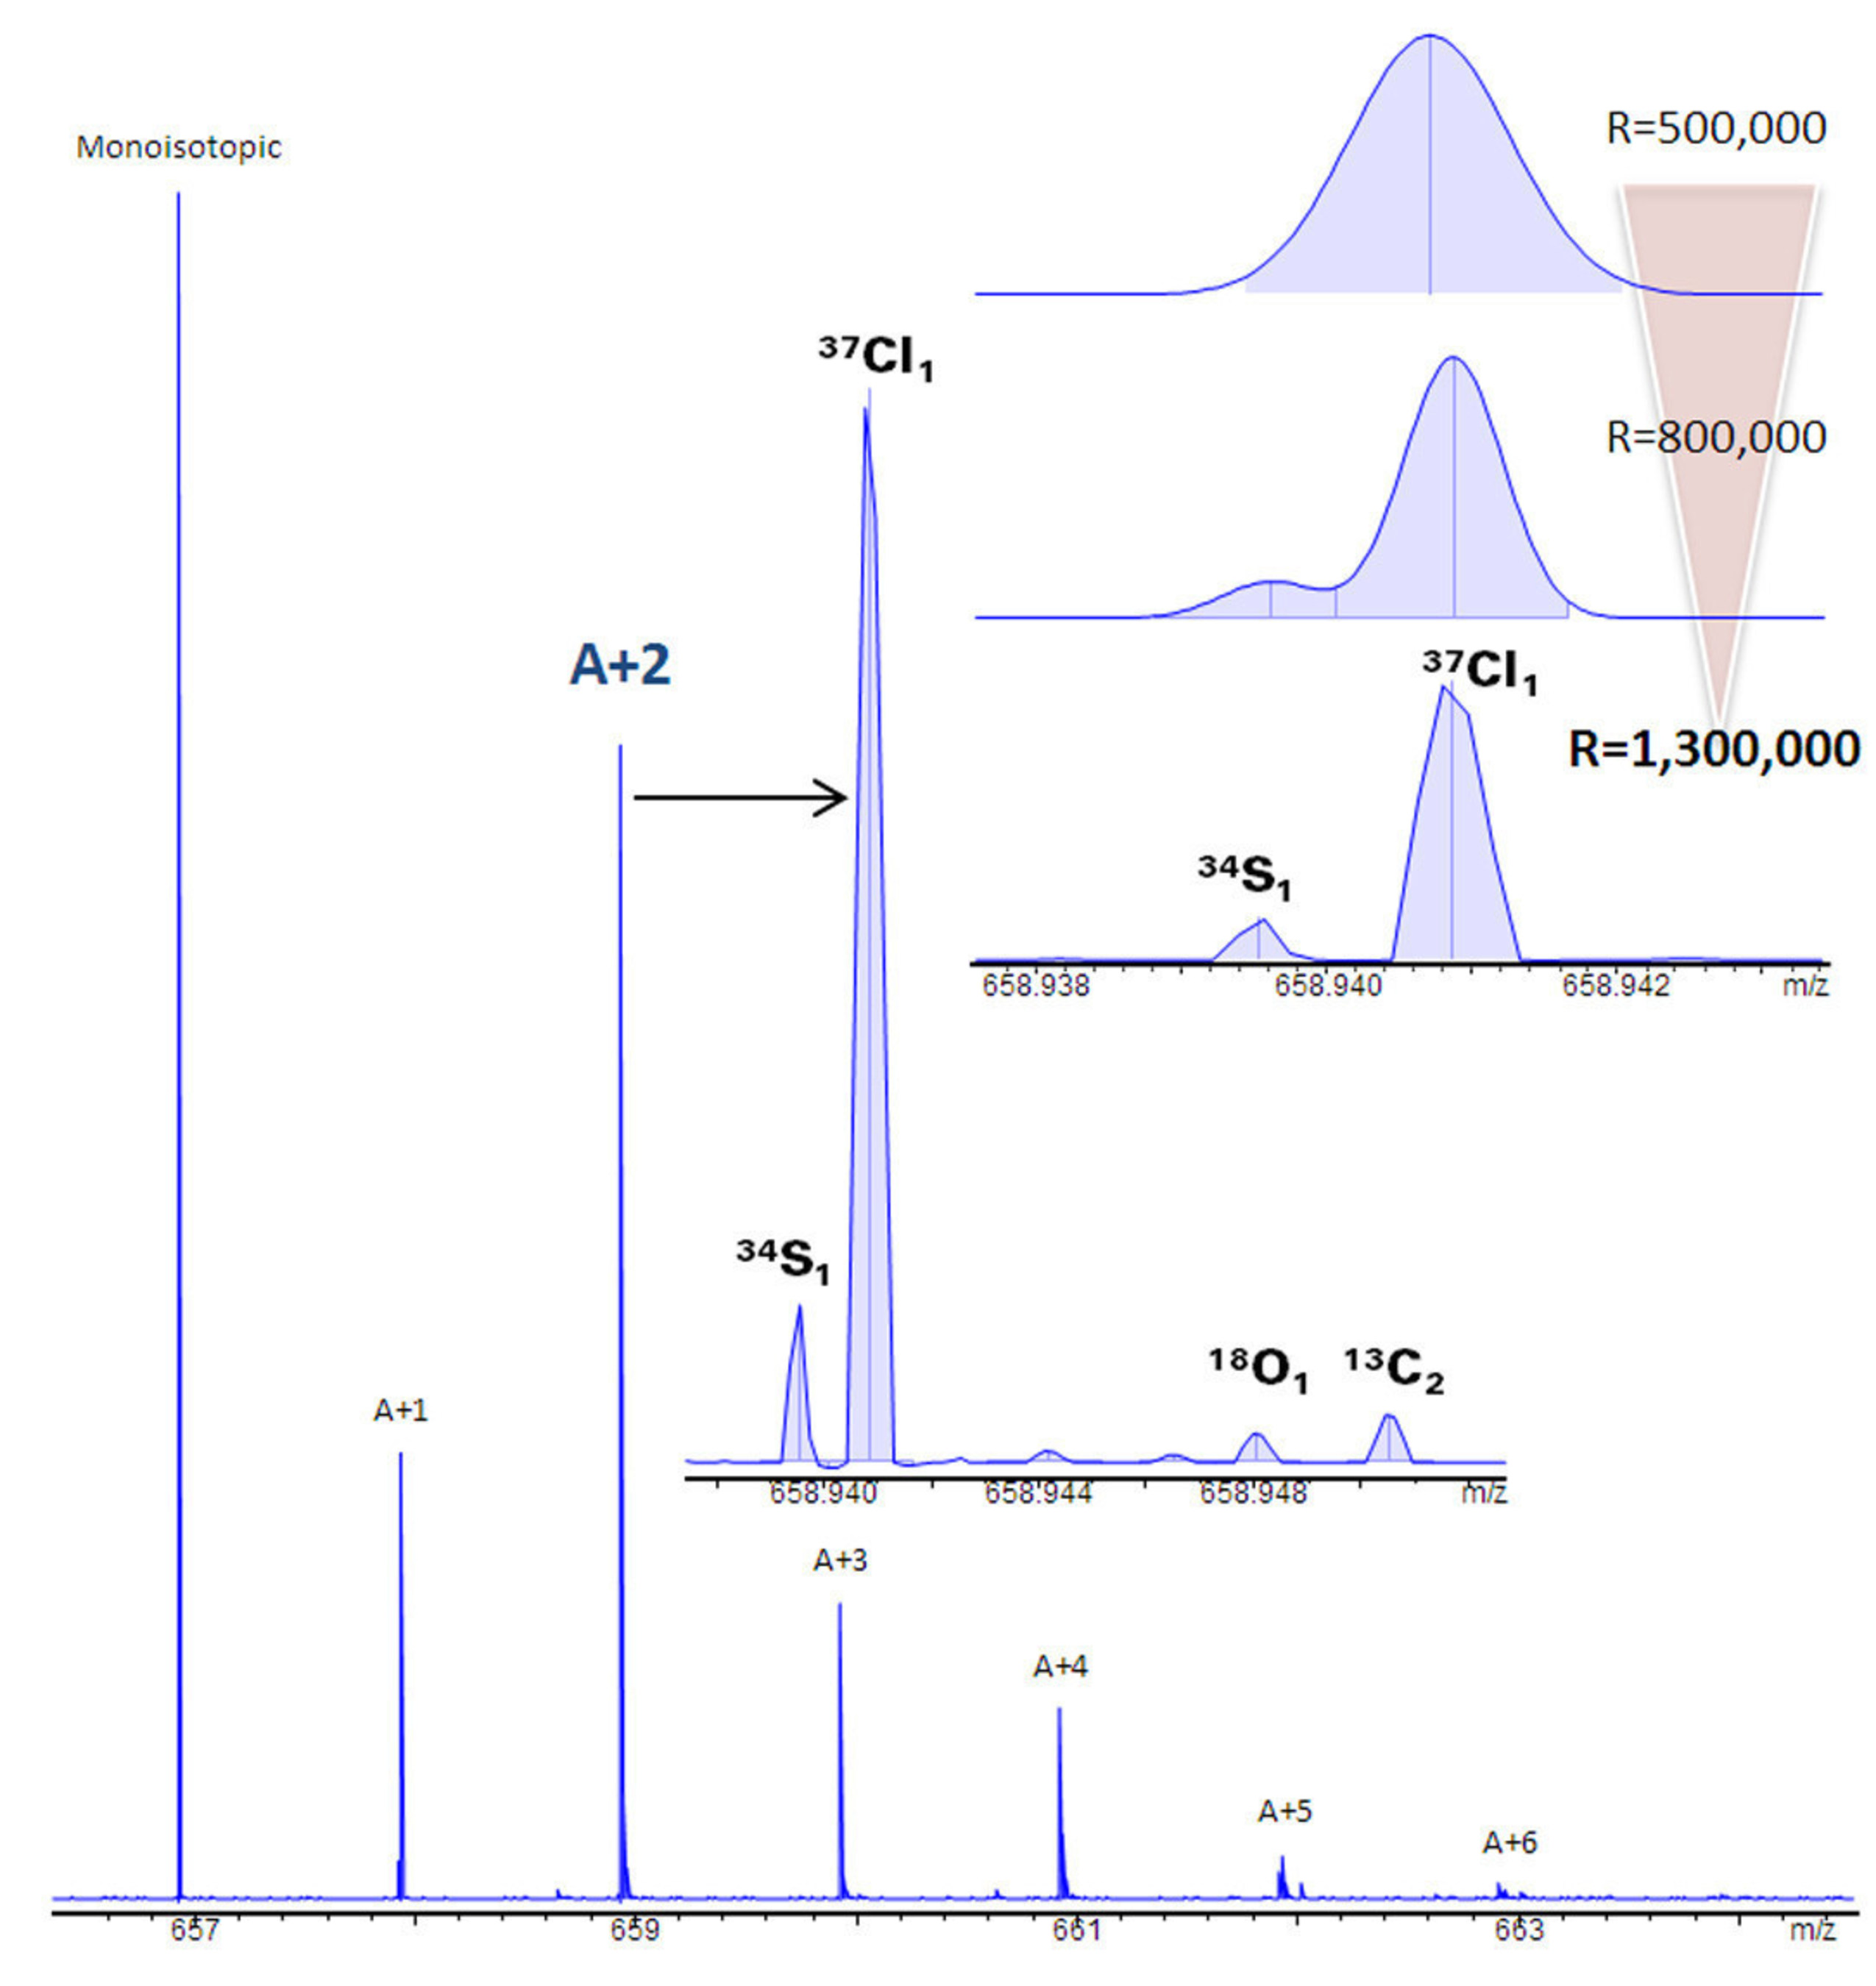 Conventional mass spectrometry only sees nominal mass peaks for the isotopic clusters within detected compounds, although they are actually comprised of many different heteroatom isotopologues. The solariX 2XR allows the user to routinely view isotopic fine structure, eliminating ambiguity for elemental formula determination by unlocking the secrets of this previously hidden realm.